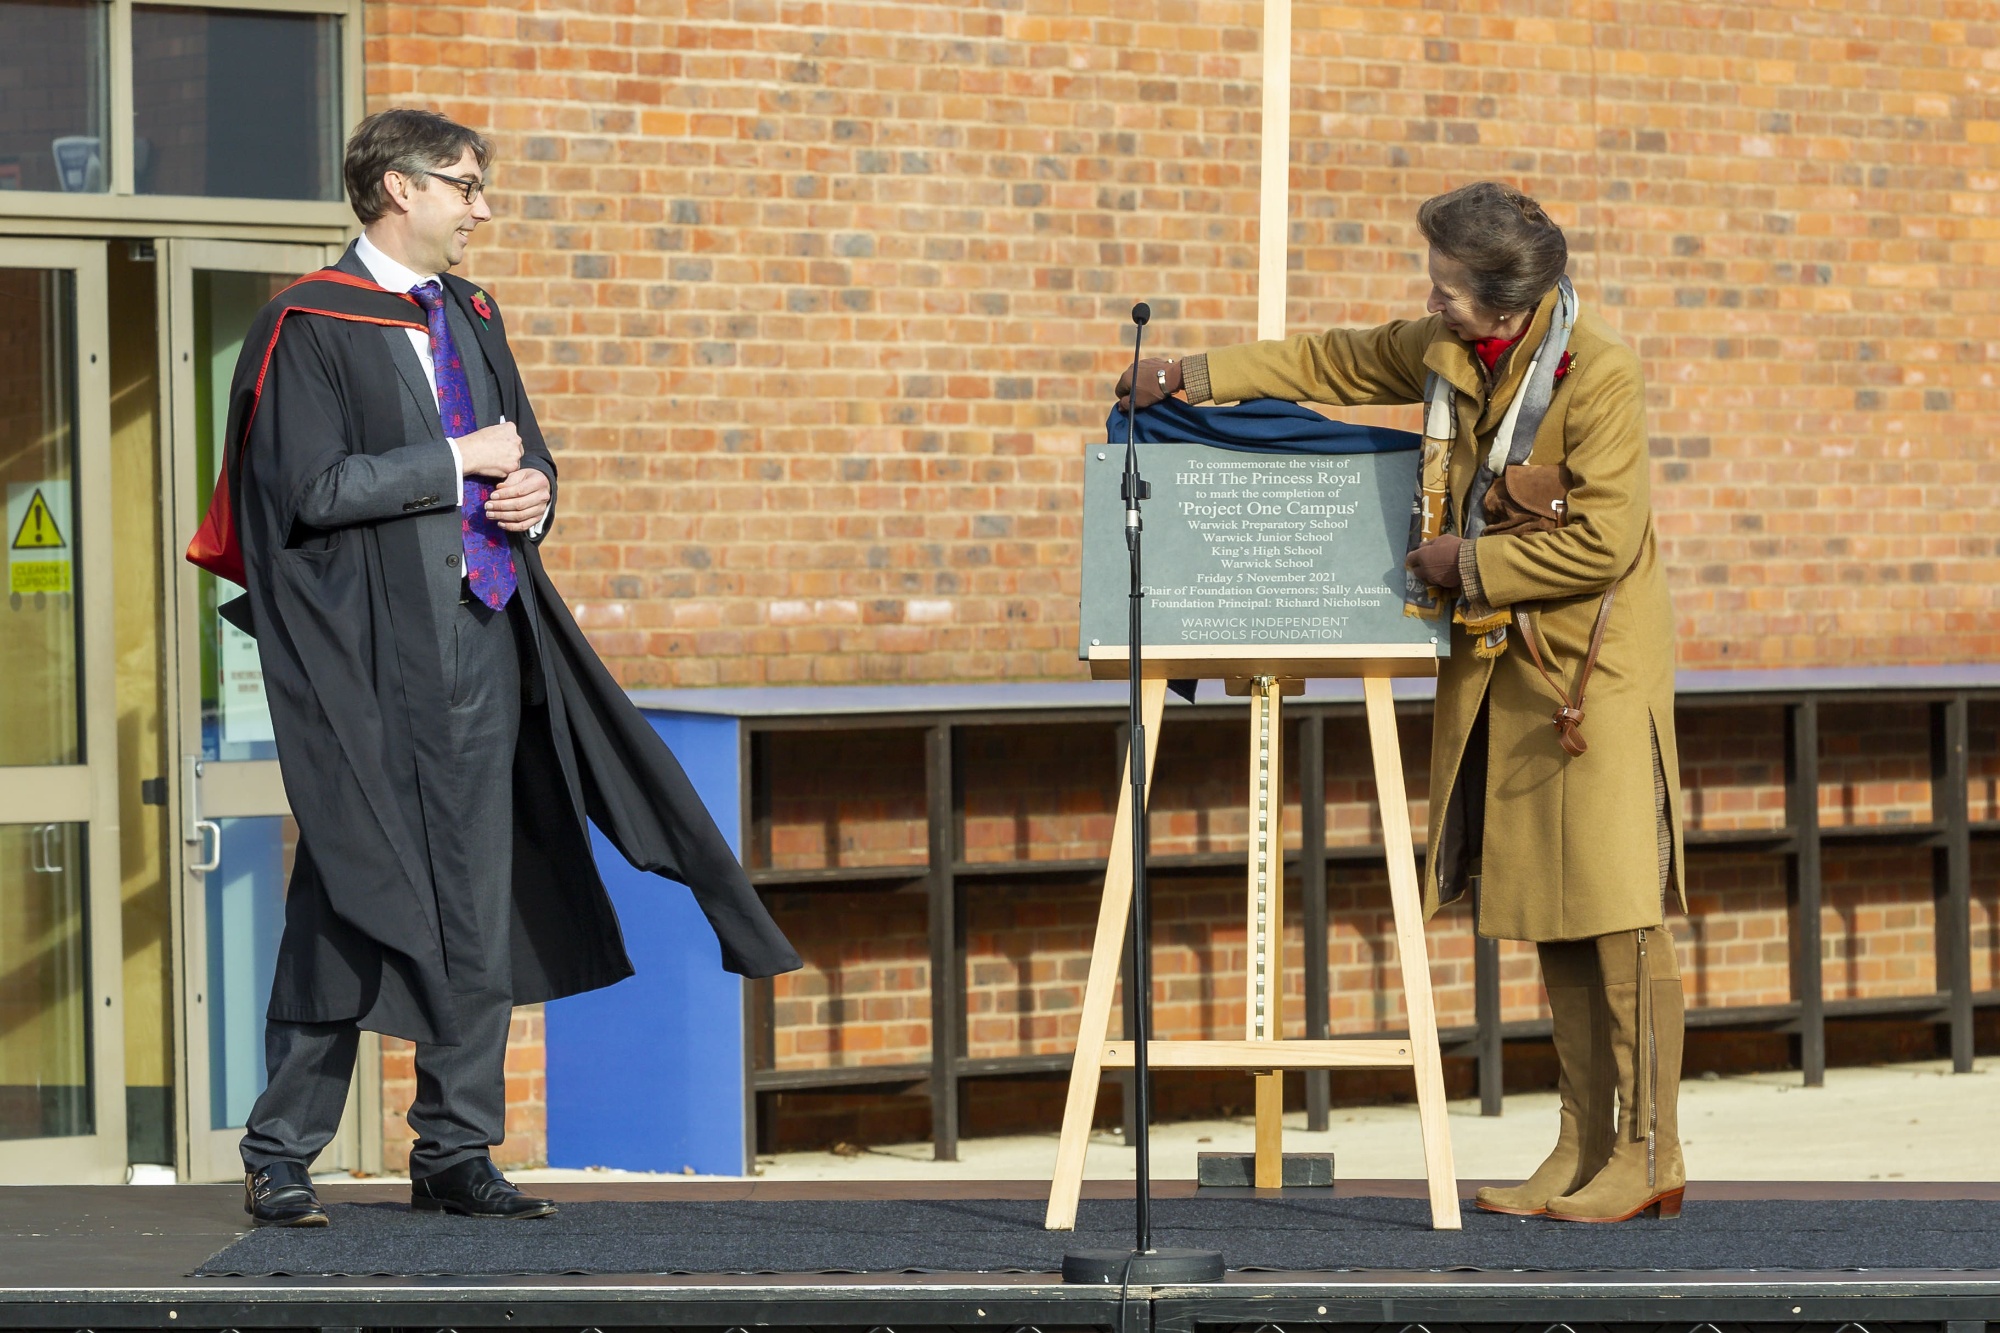 HRH The Princess Royal unveiling a plaque dedicated to Project One Campus